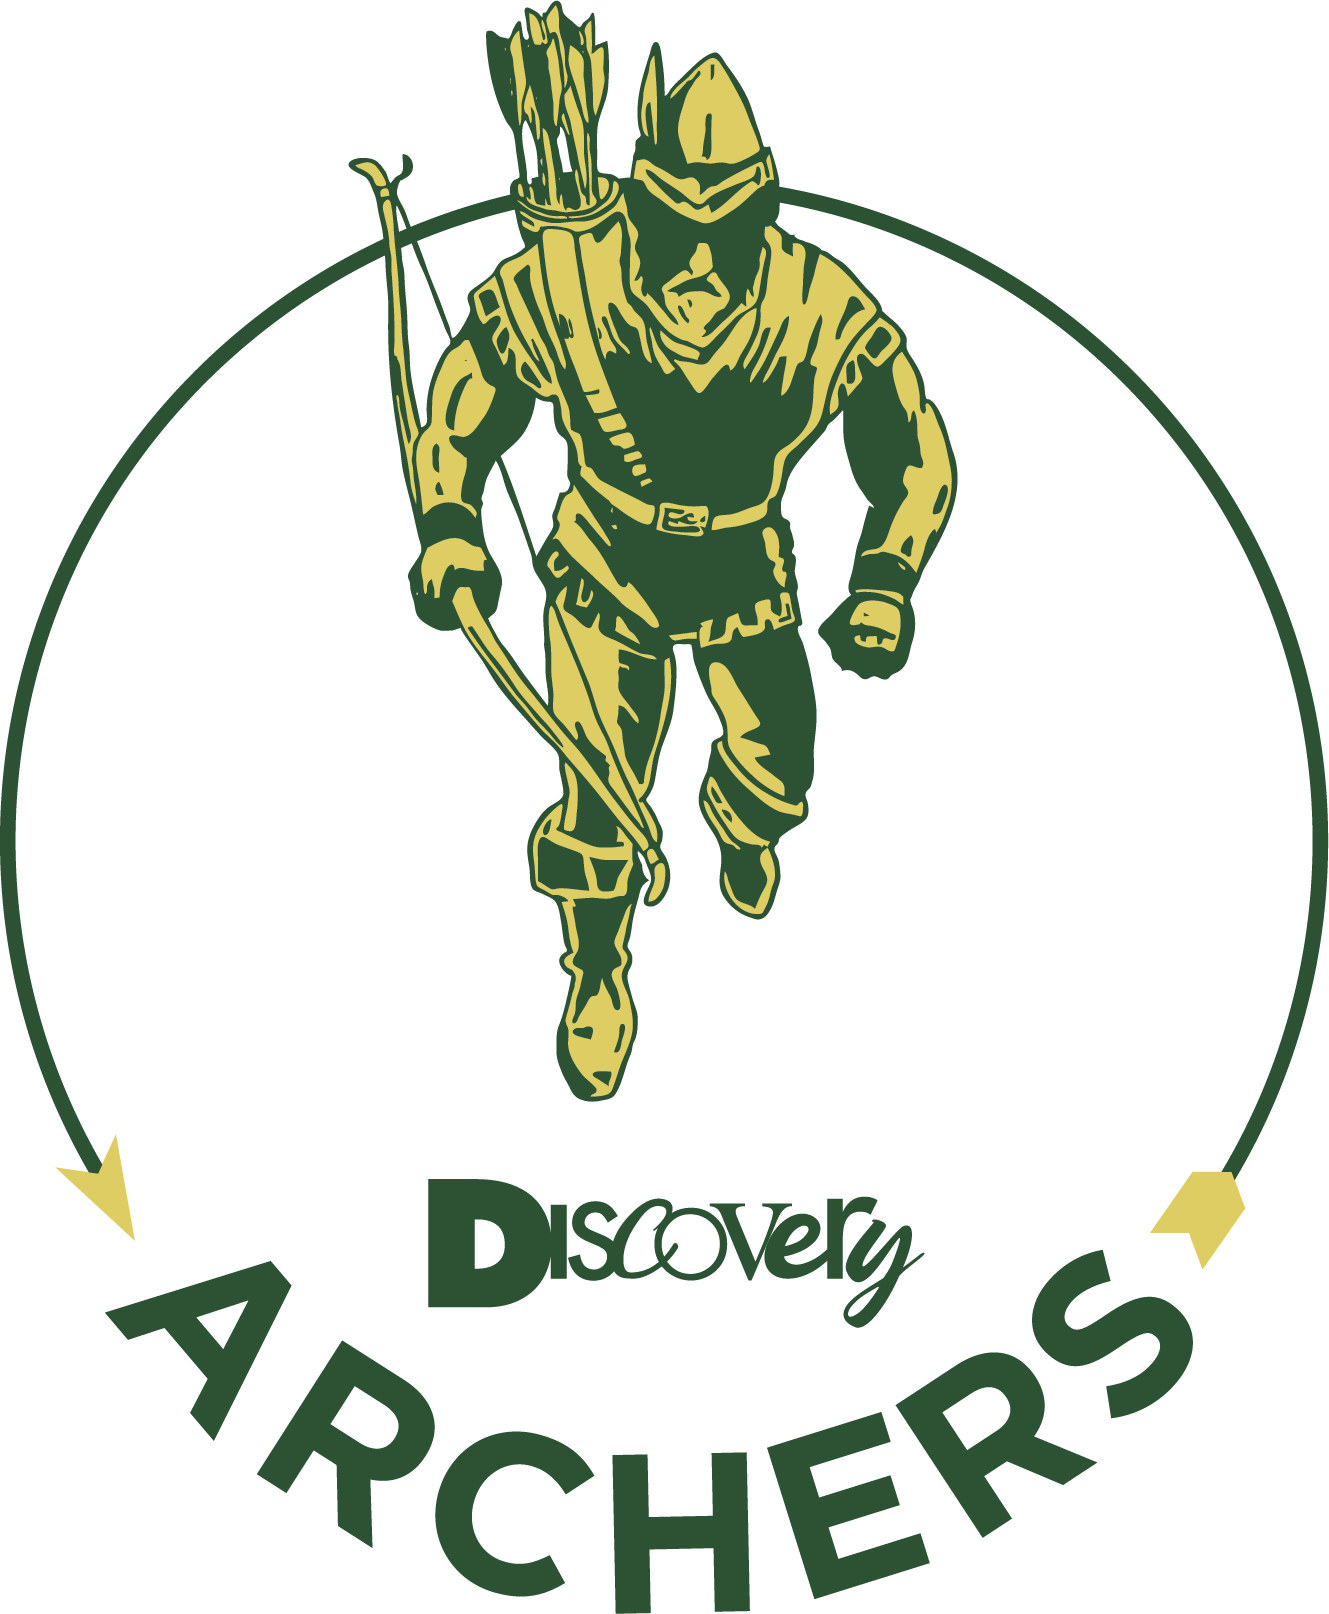 Discovery athletic logo